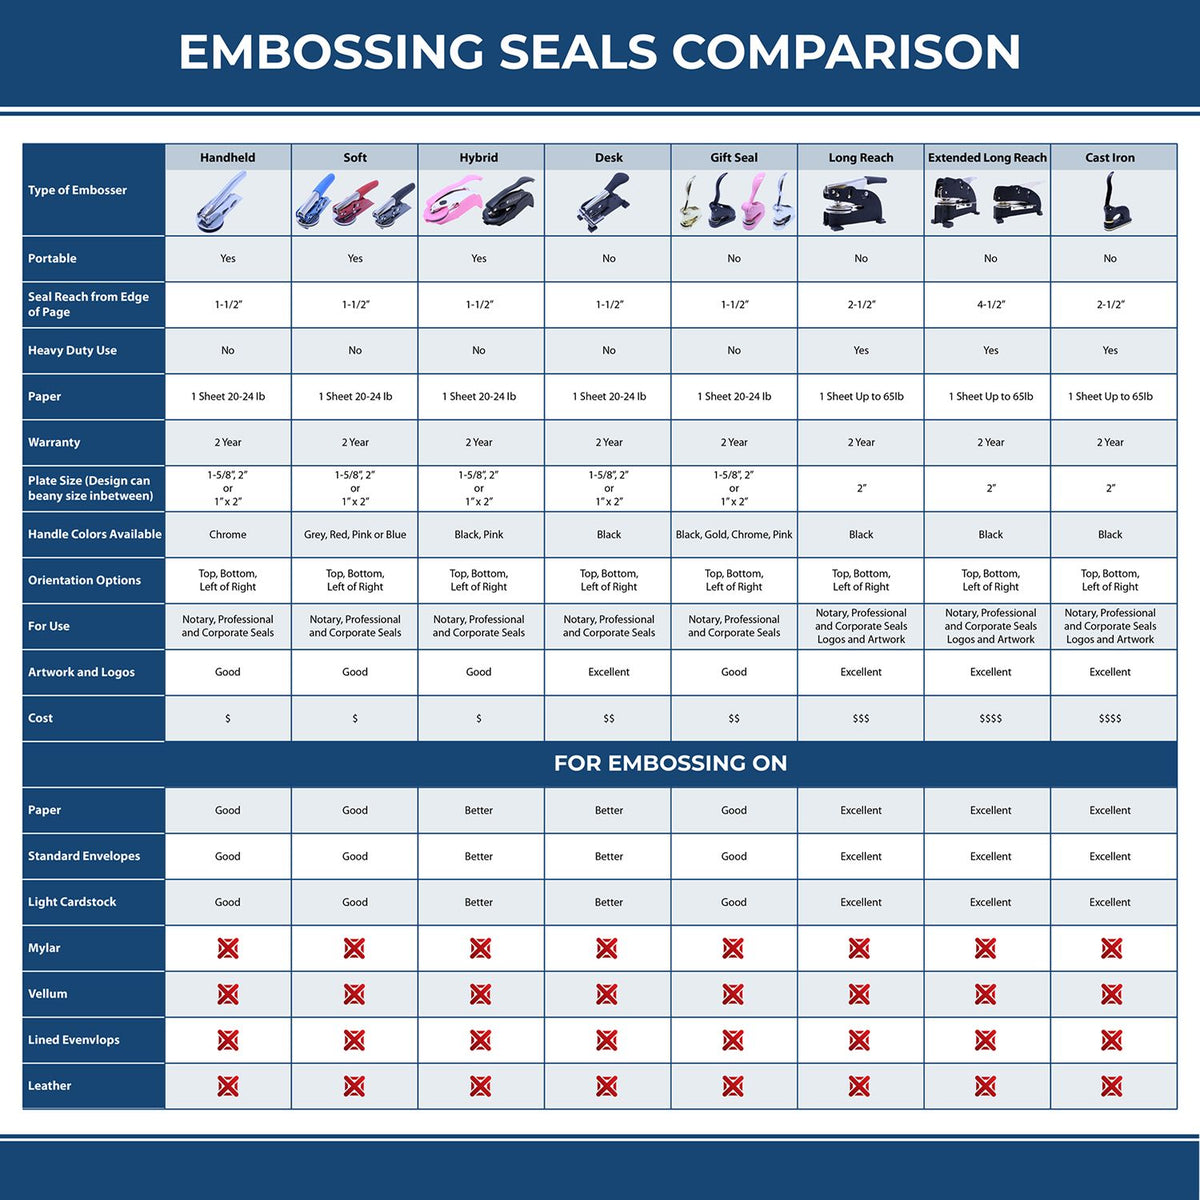 A comparison chart for the different types of mount models available for the Heavy Duty Cast Iron Mississippi Land Surveyor Seal Embosser.